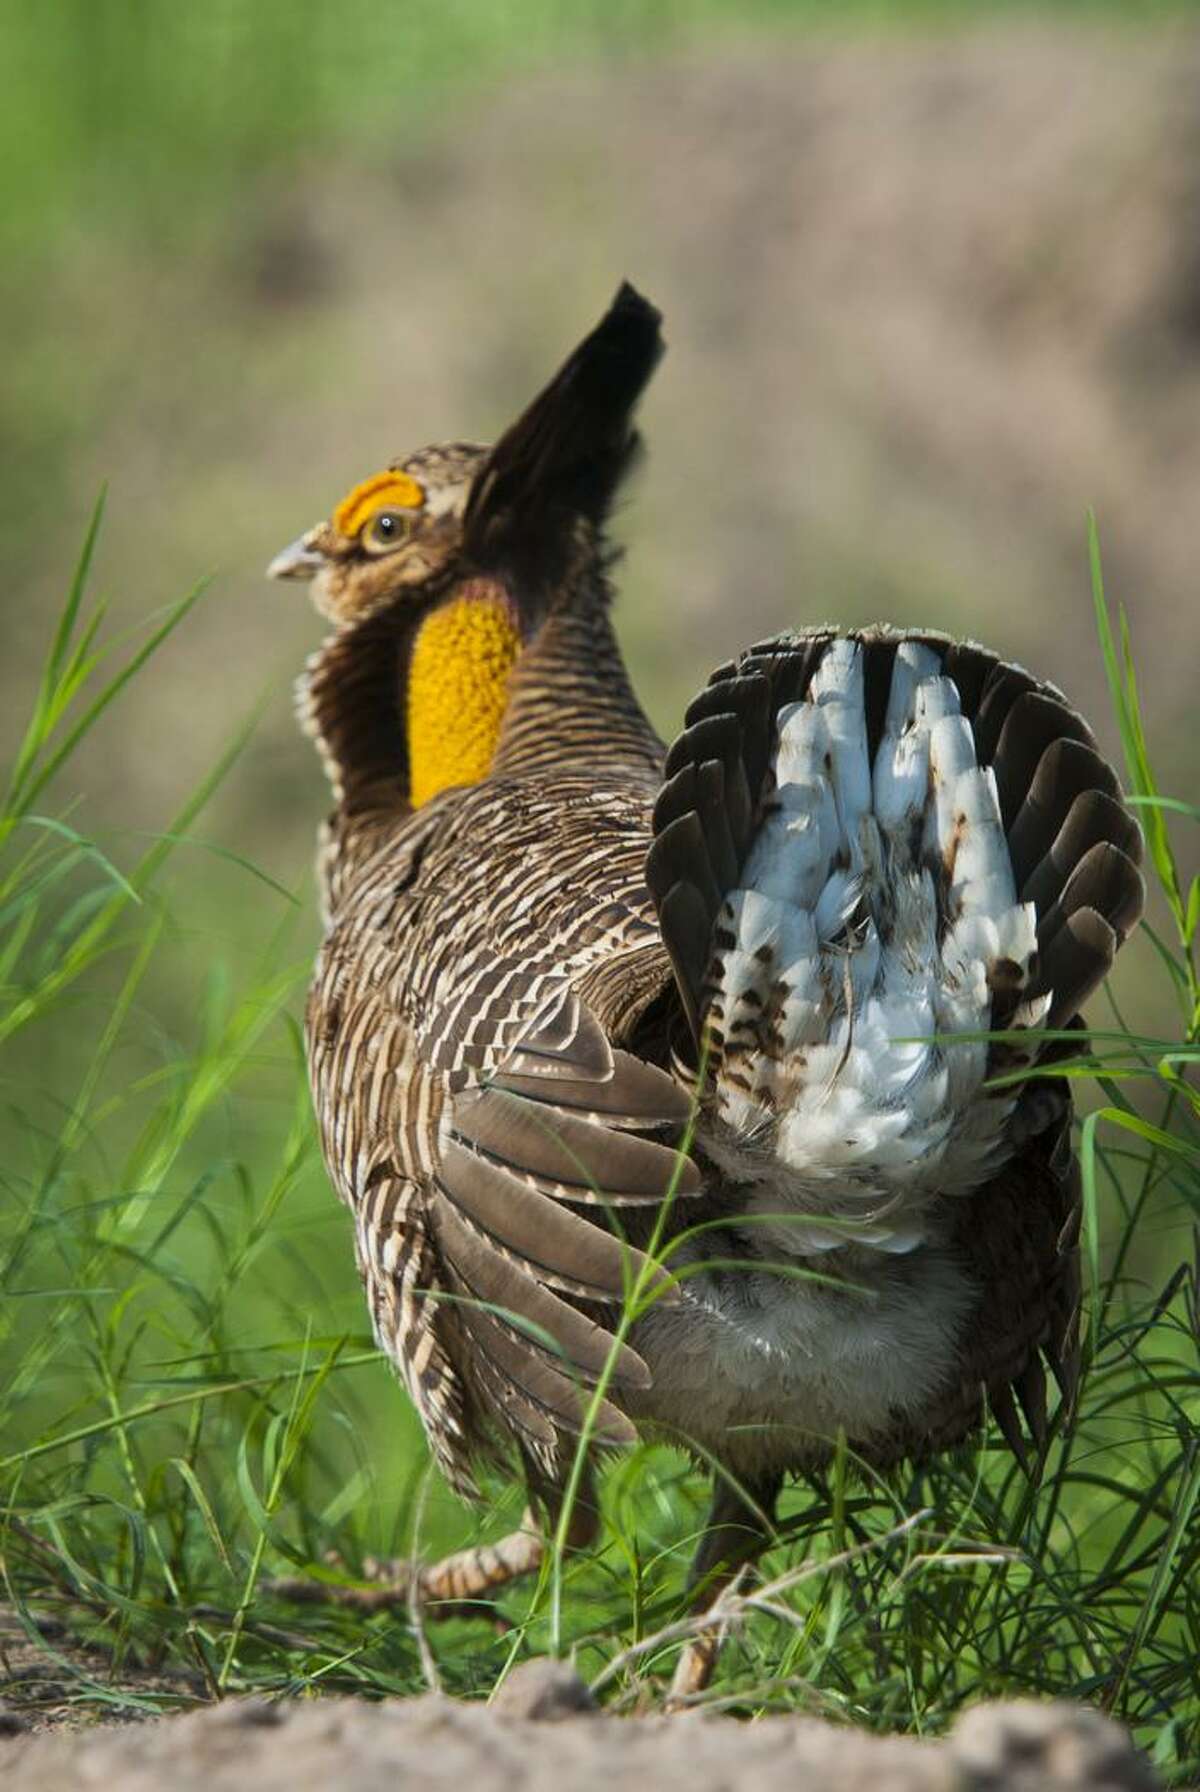 The Houston Zoo is making a concerted effort to bring back the Attwater's Prairie Chicken, which is currently an endangered species.